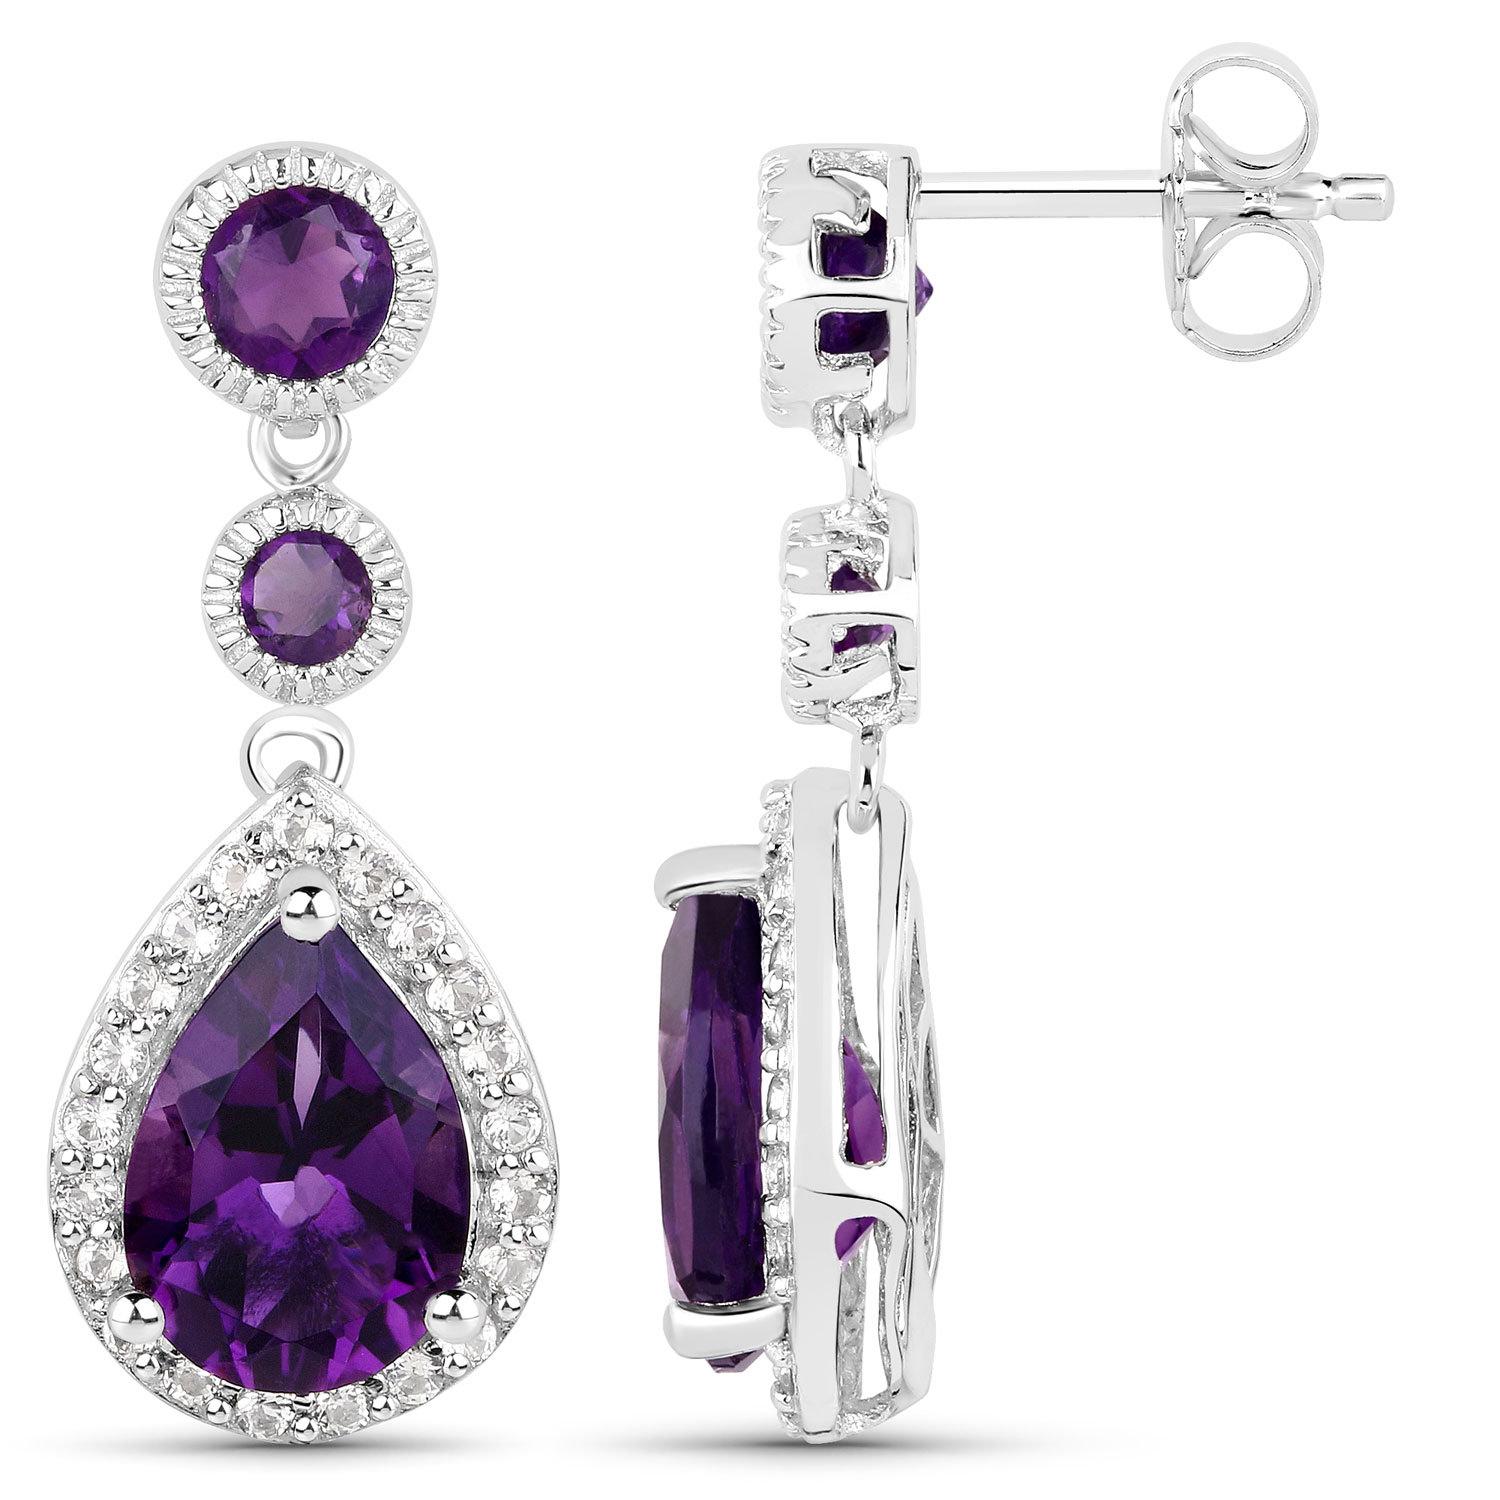 It comes with the appraisal by GIA GG/AJP 
Amethyst = 6.15 Carats
Cut: Pear, Round
Stone Quantity: 6
White Topaz = 0.85 Carats
Cut: Round
Stone Quantity: 42
Metal: 18K White Gold Plated Silver
Post With Friction Back
Height: 8.5 mm
Width: 12